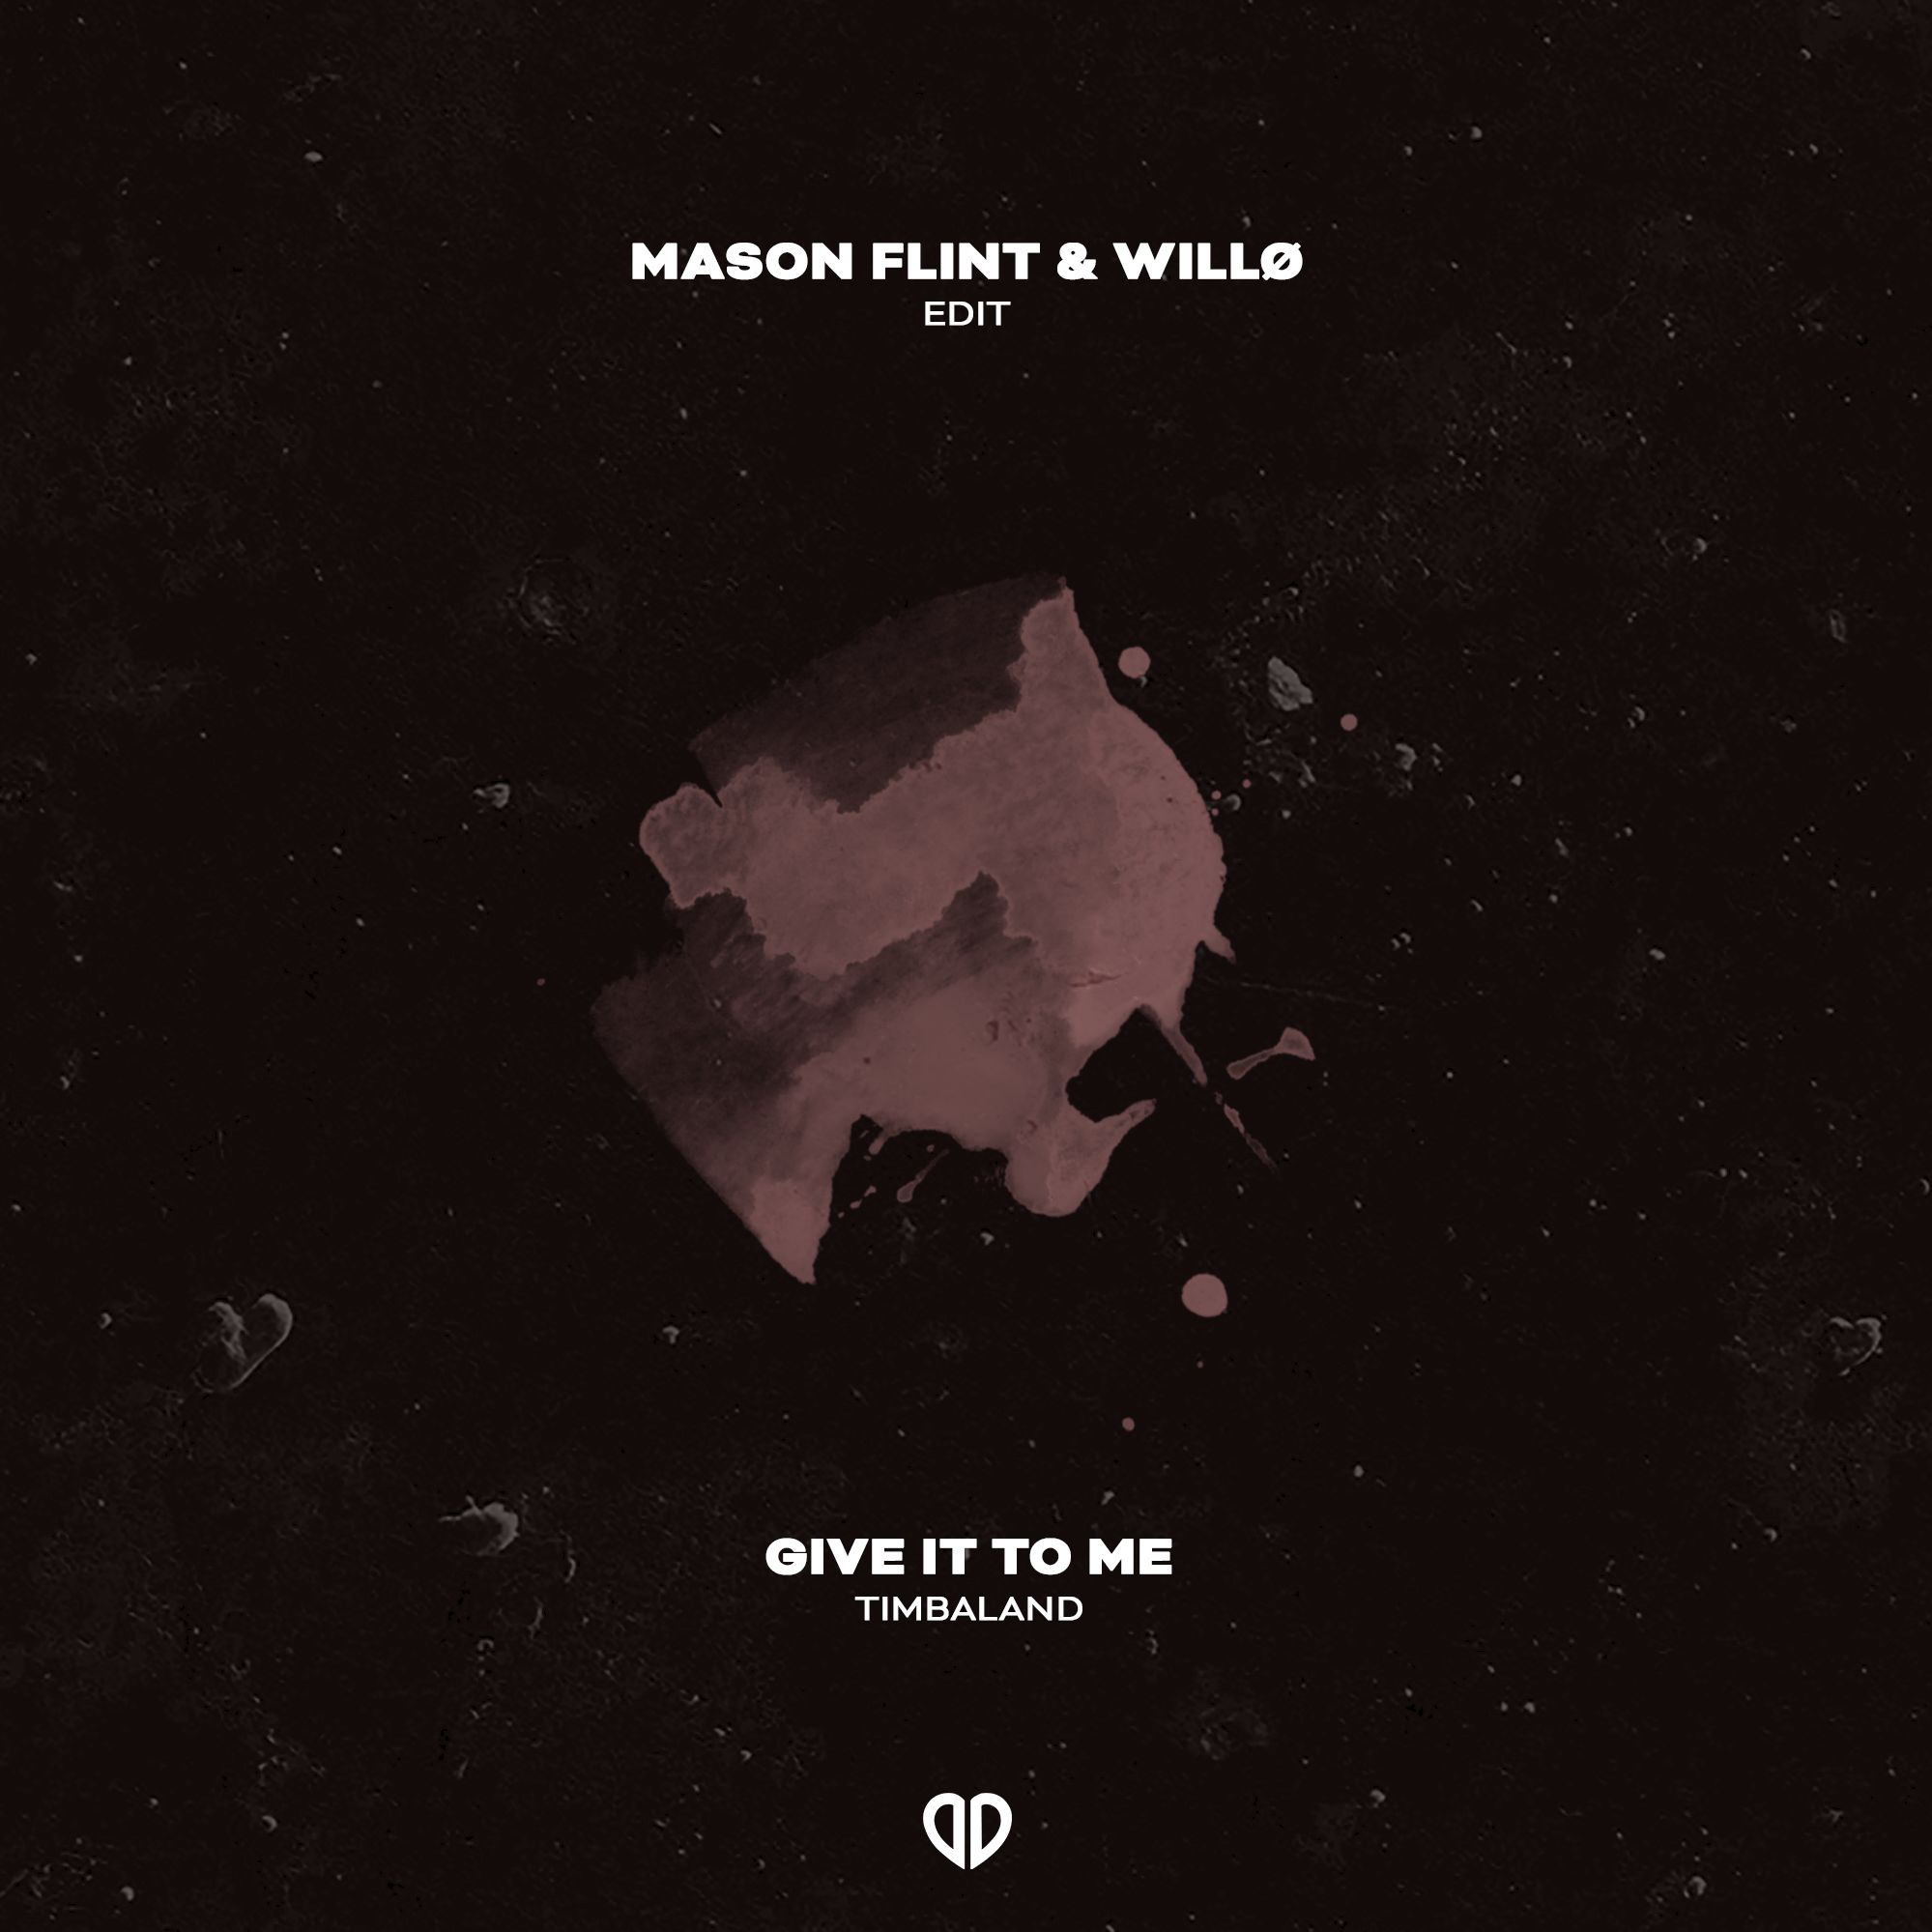 Download Timbaland - Give It To Me (Mason Flint & Willo Edit) [DropUnited Exclusive]